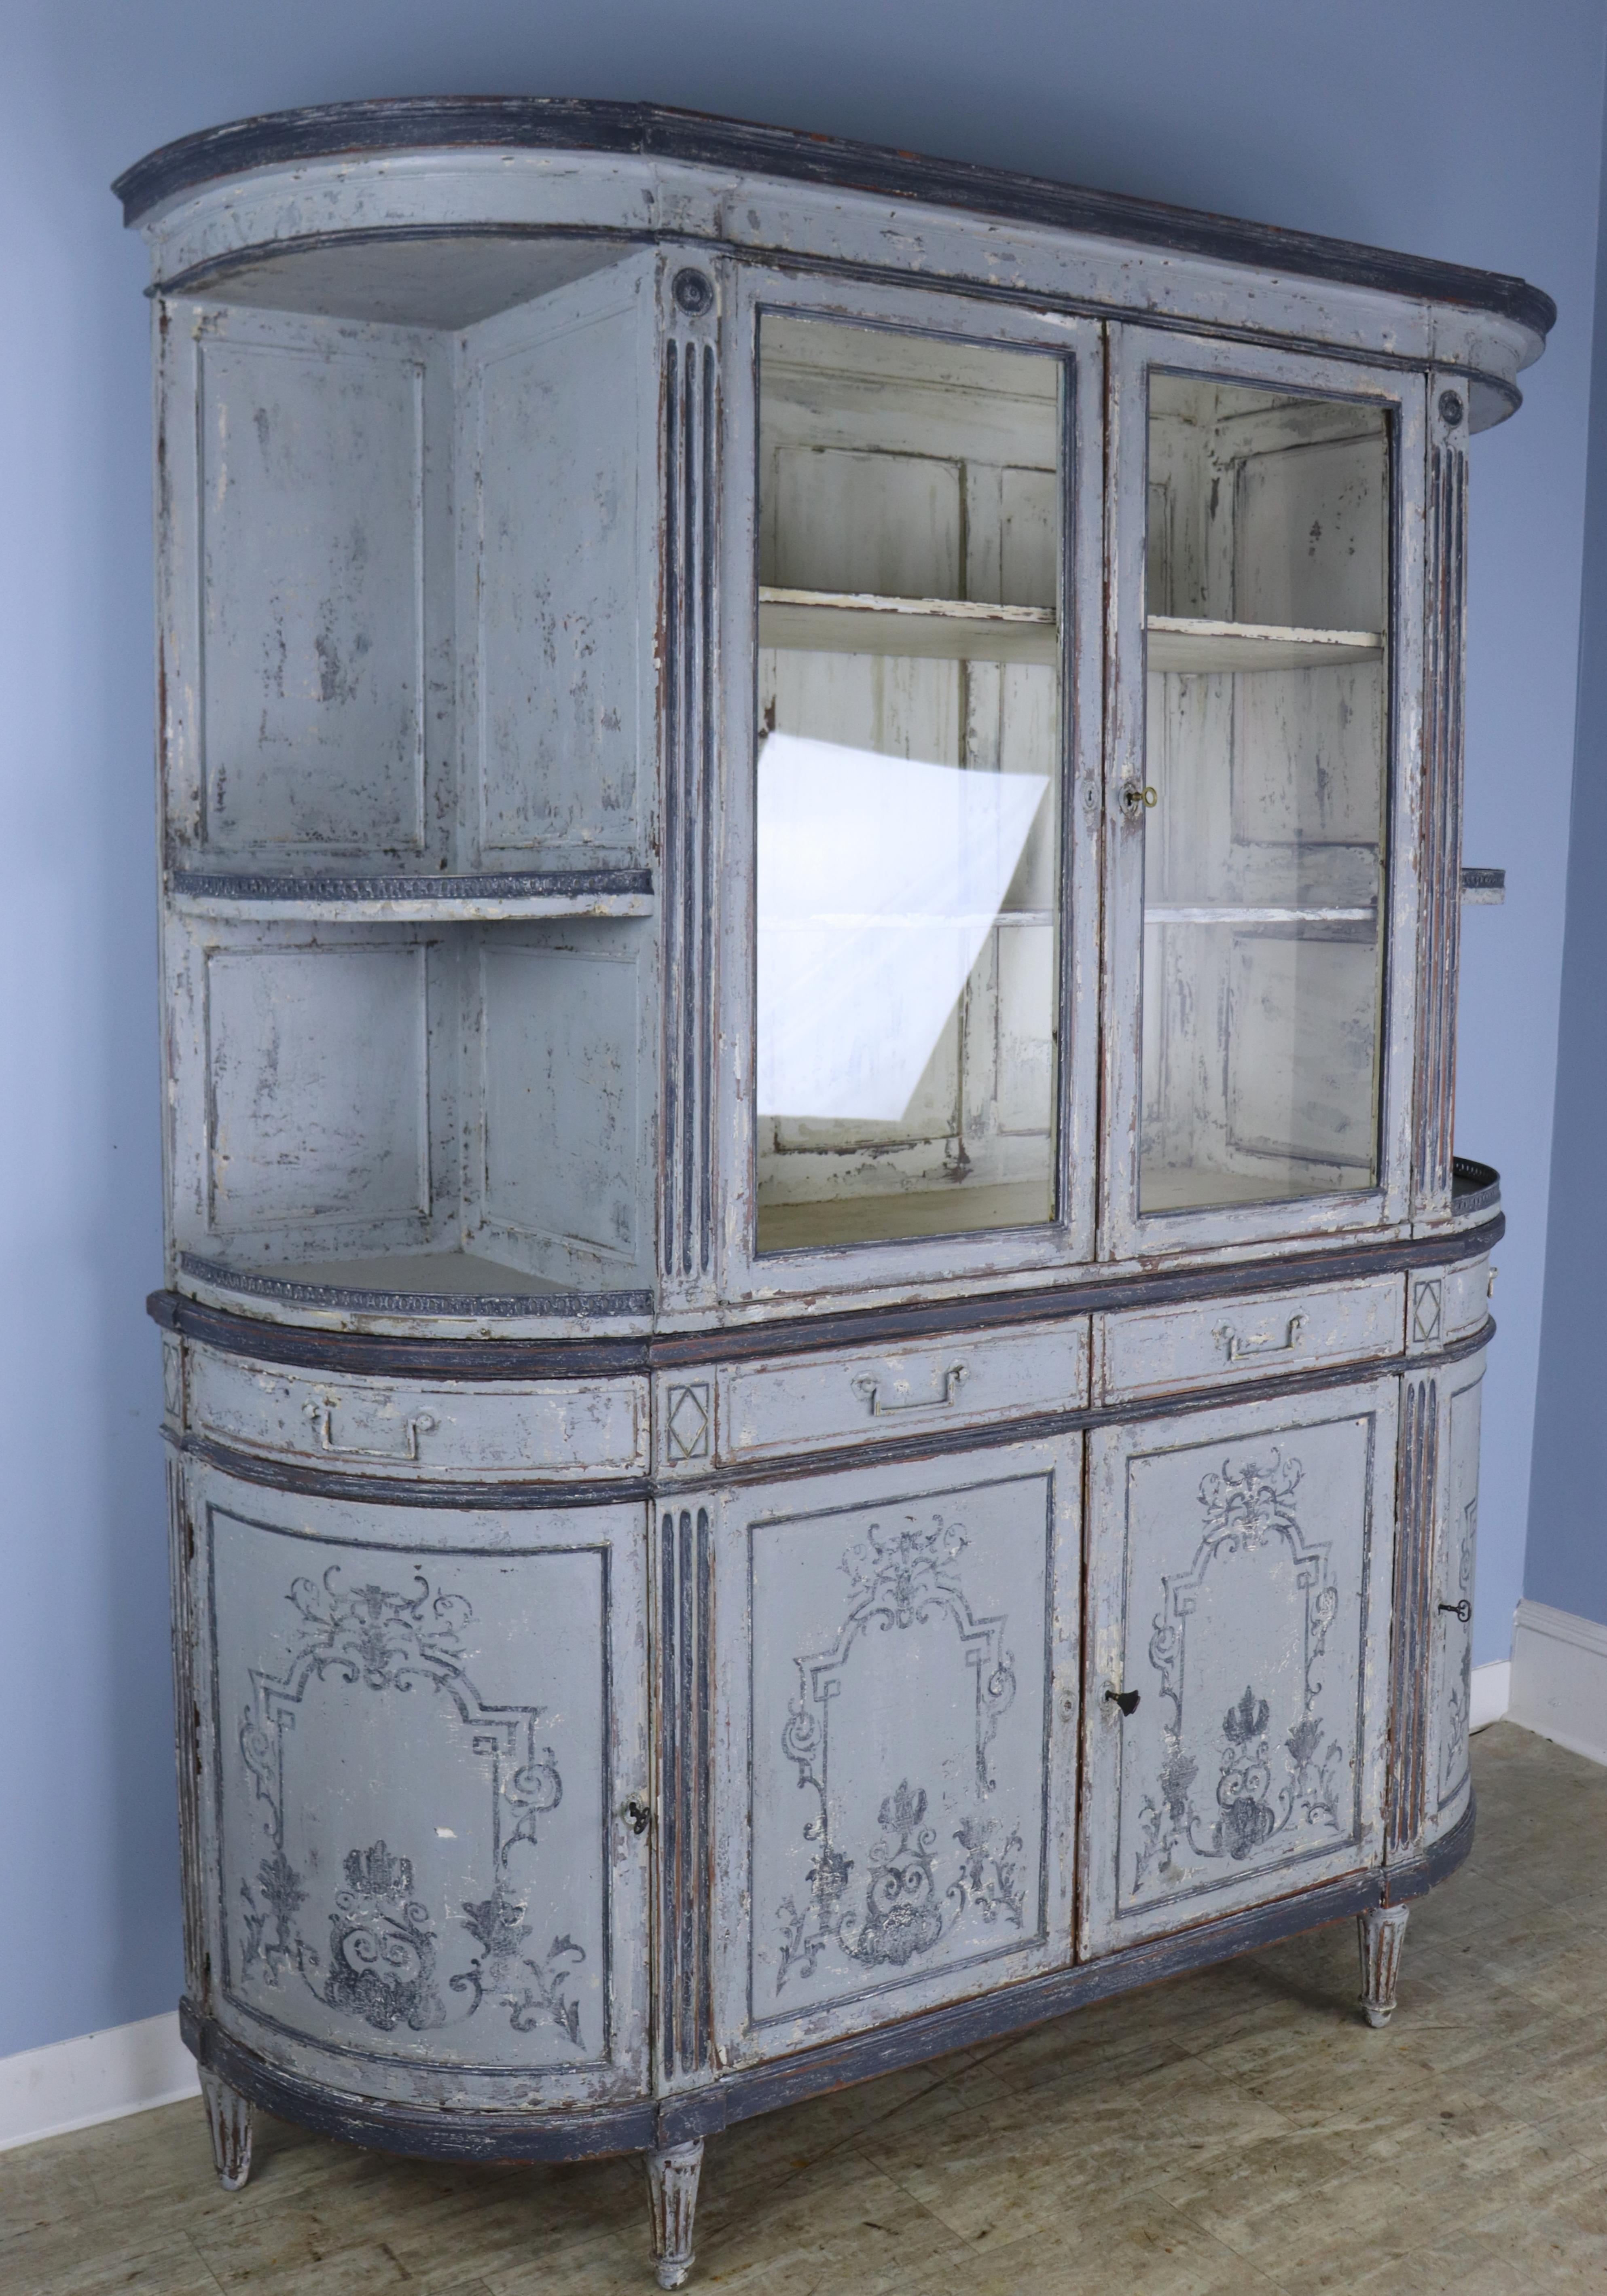 A show stopping Beaux Arts style cabinet with bowed ends.  The gray/lavendar paint has been refreshed and faux distressed but the interior is clean.  Both the drawers and side doors open out 14 inches, so that when they are open the total width of